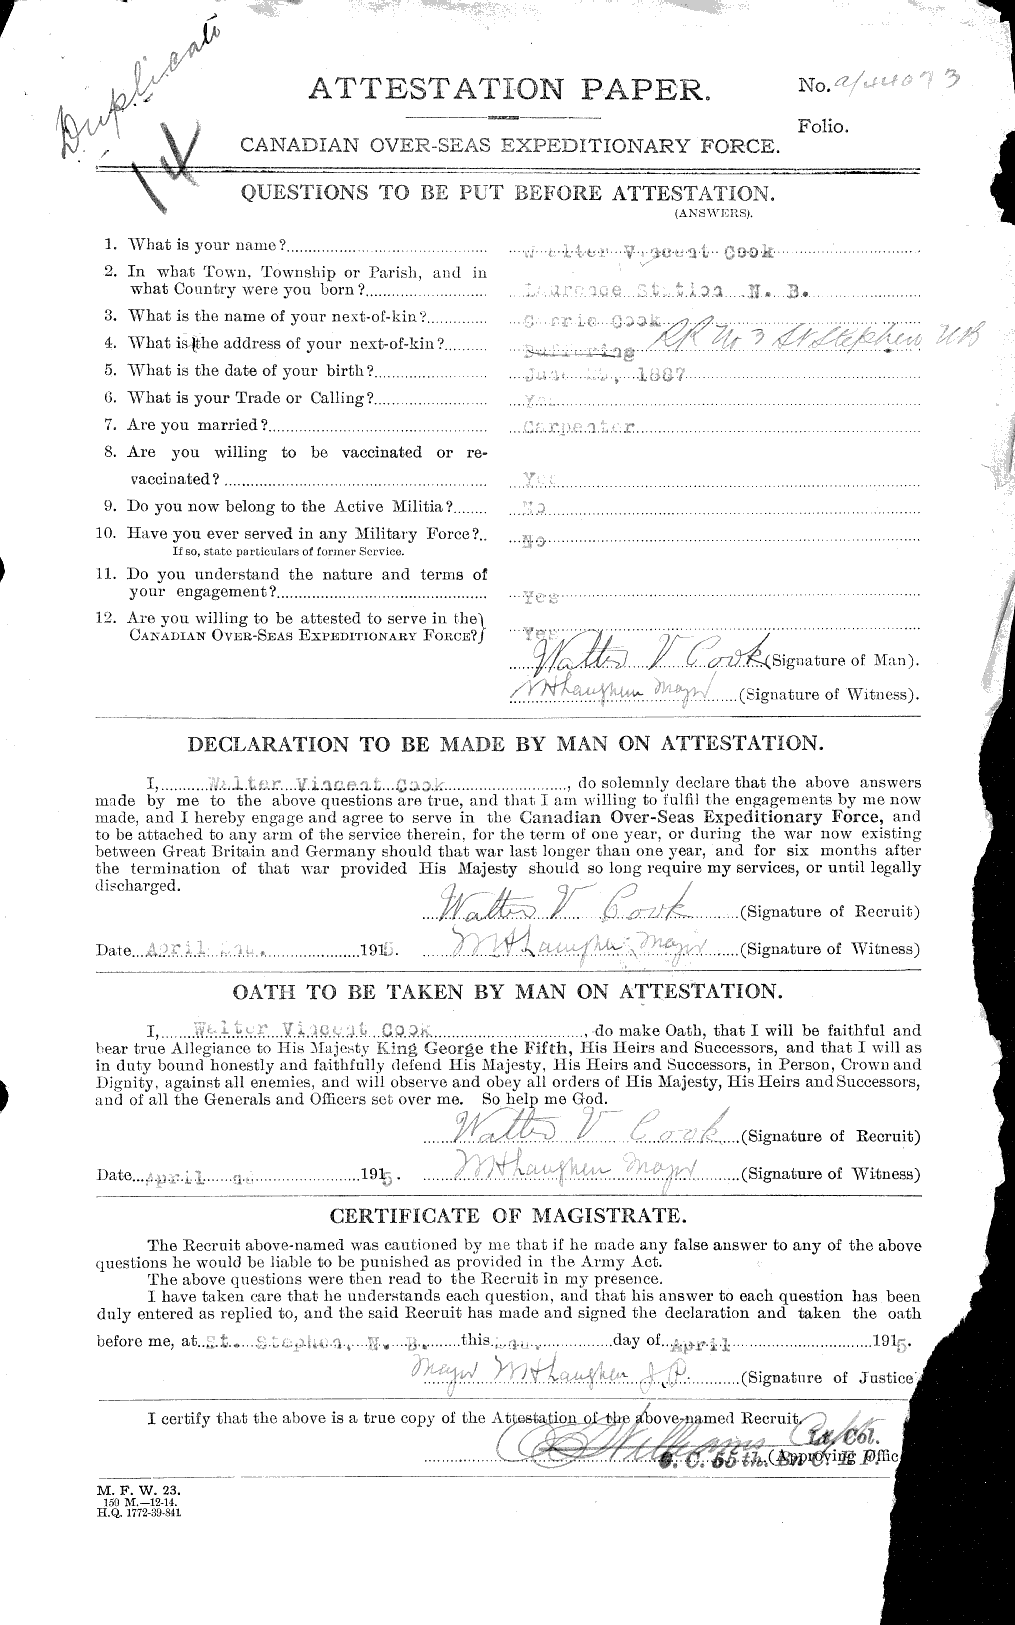 Personnel Records of the First World War - CEF 039077a